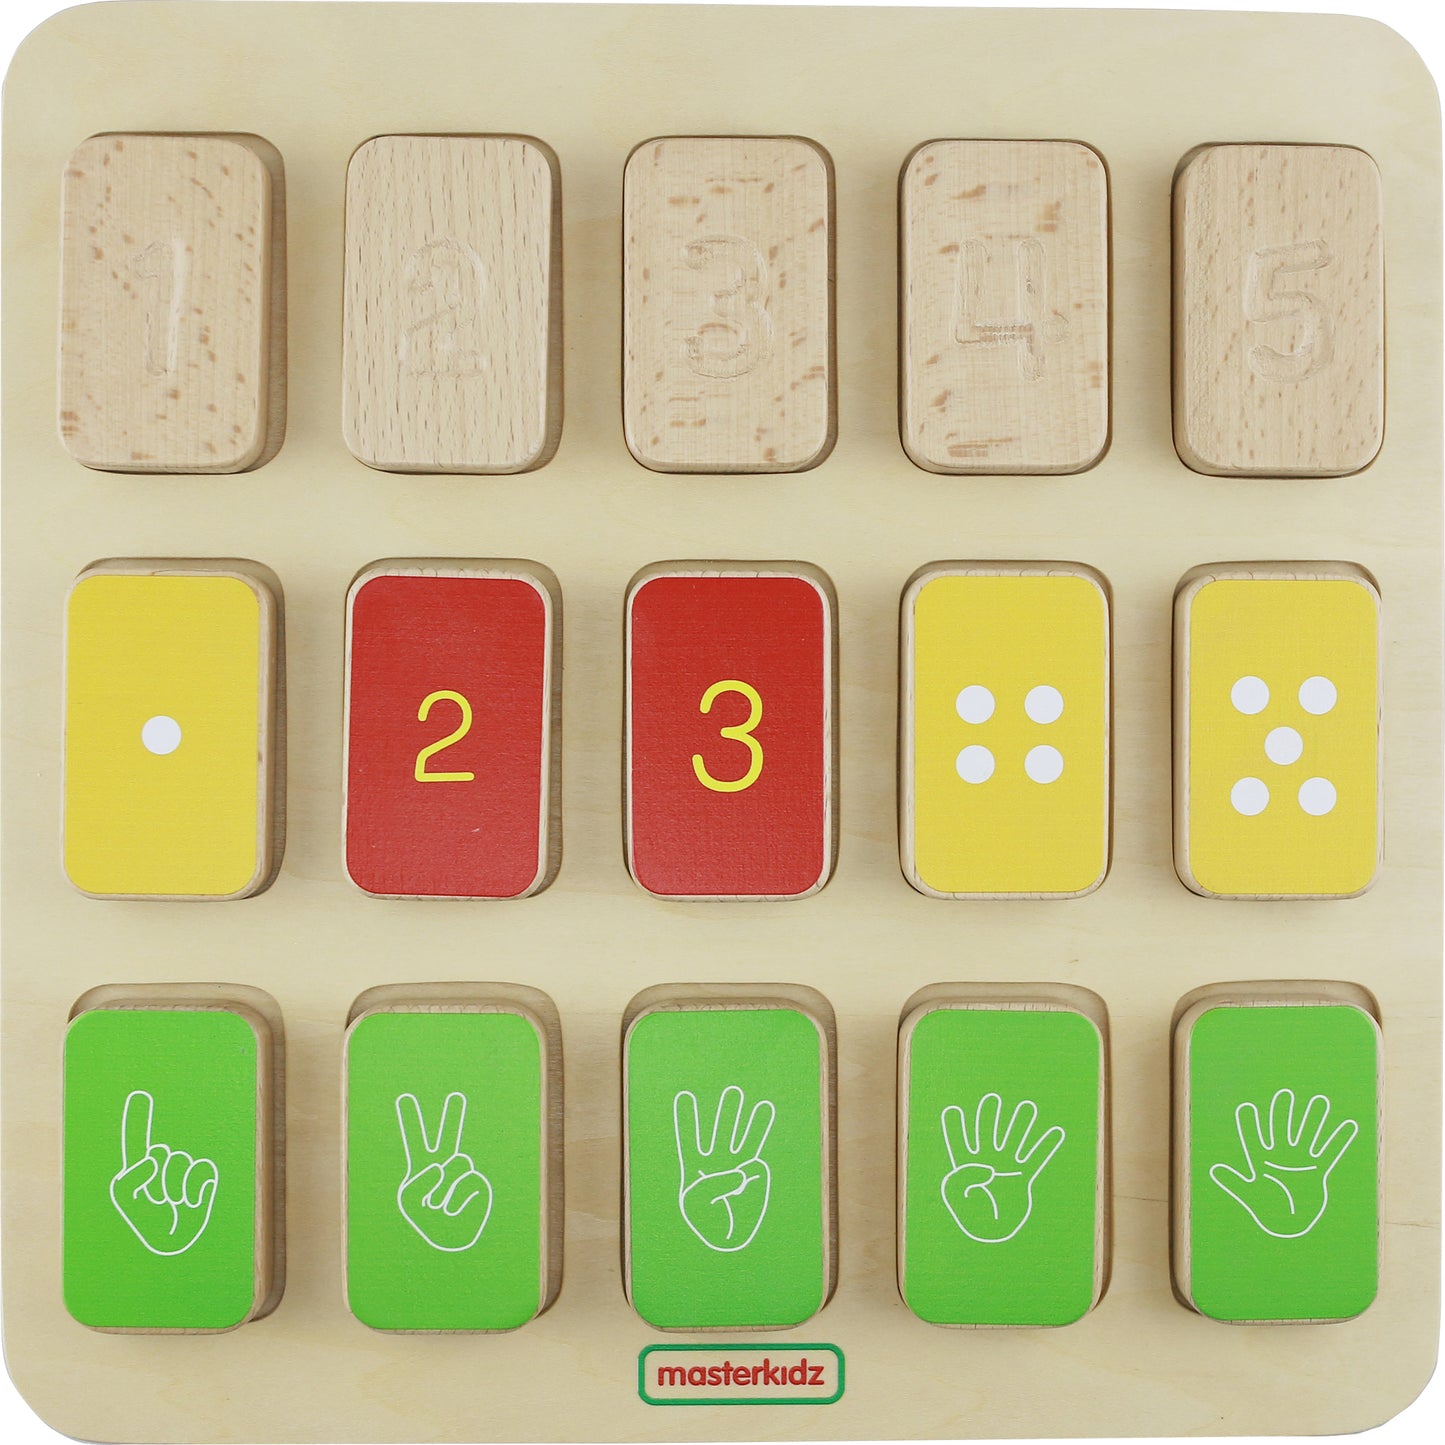 Masterkidz Visual and Tactile 1-5 Learning Board 視覺與觸覺 1-5學習板